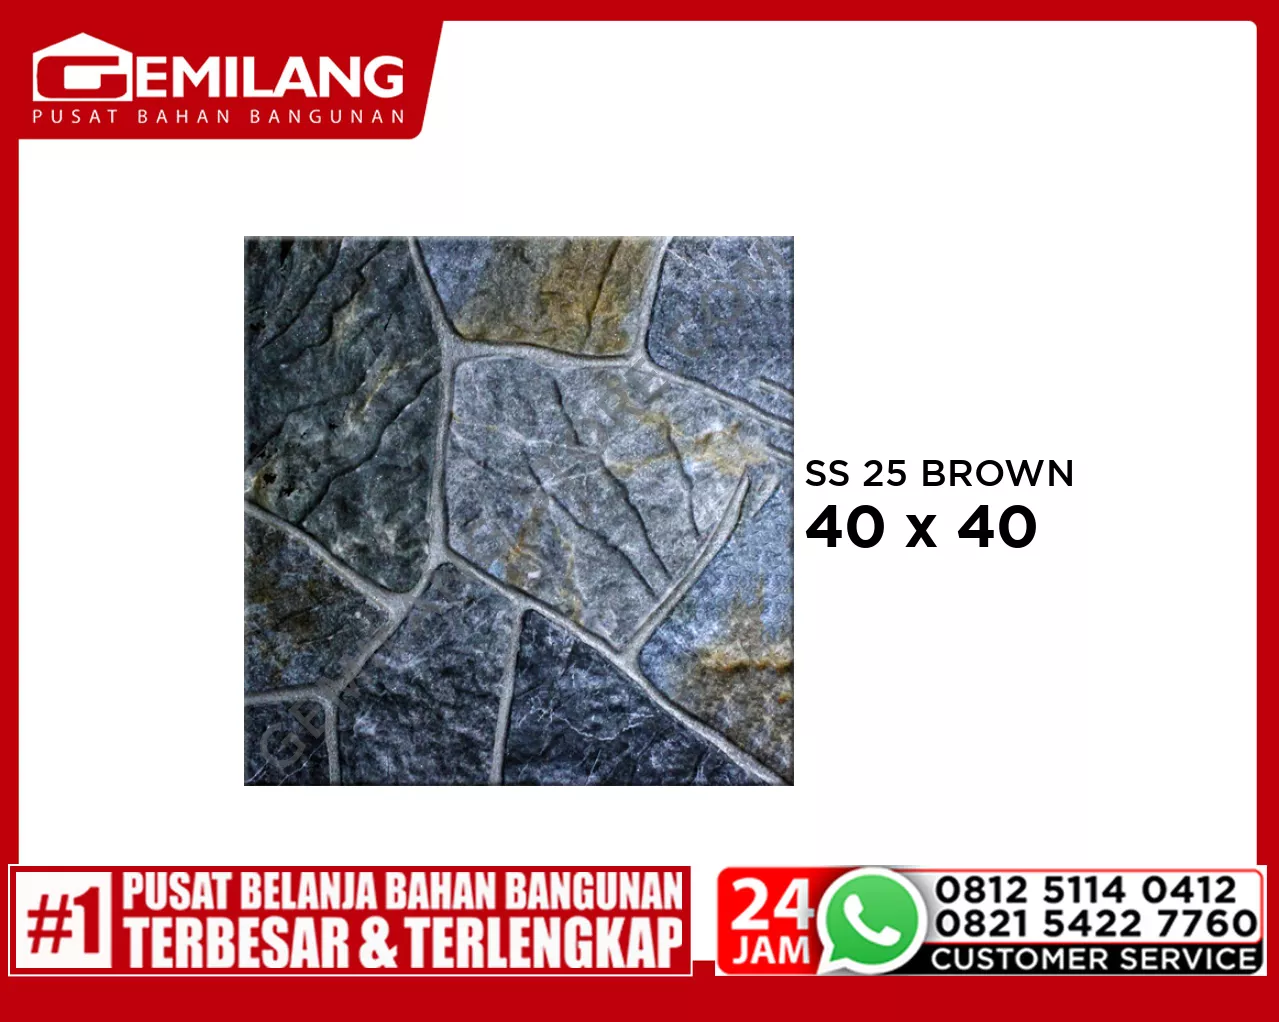 CENTRO SS 25 BROWN 40 x 40